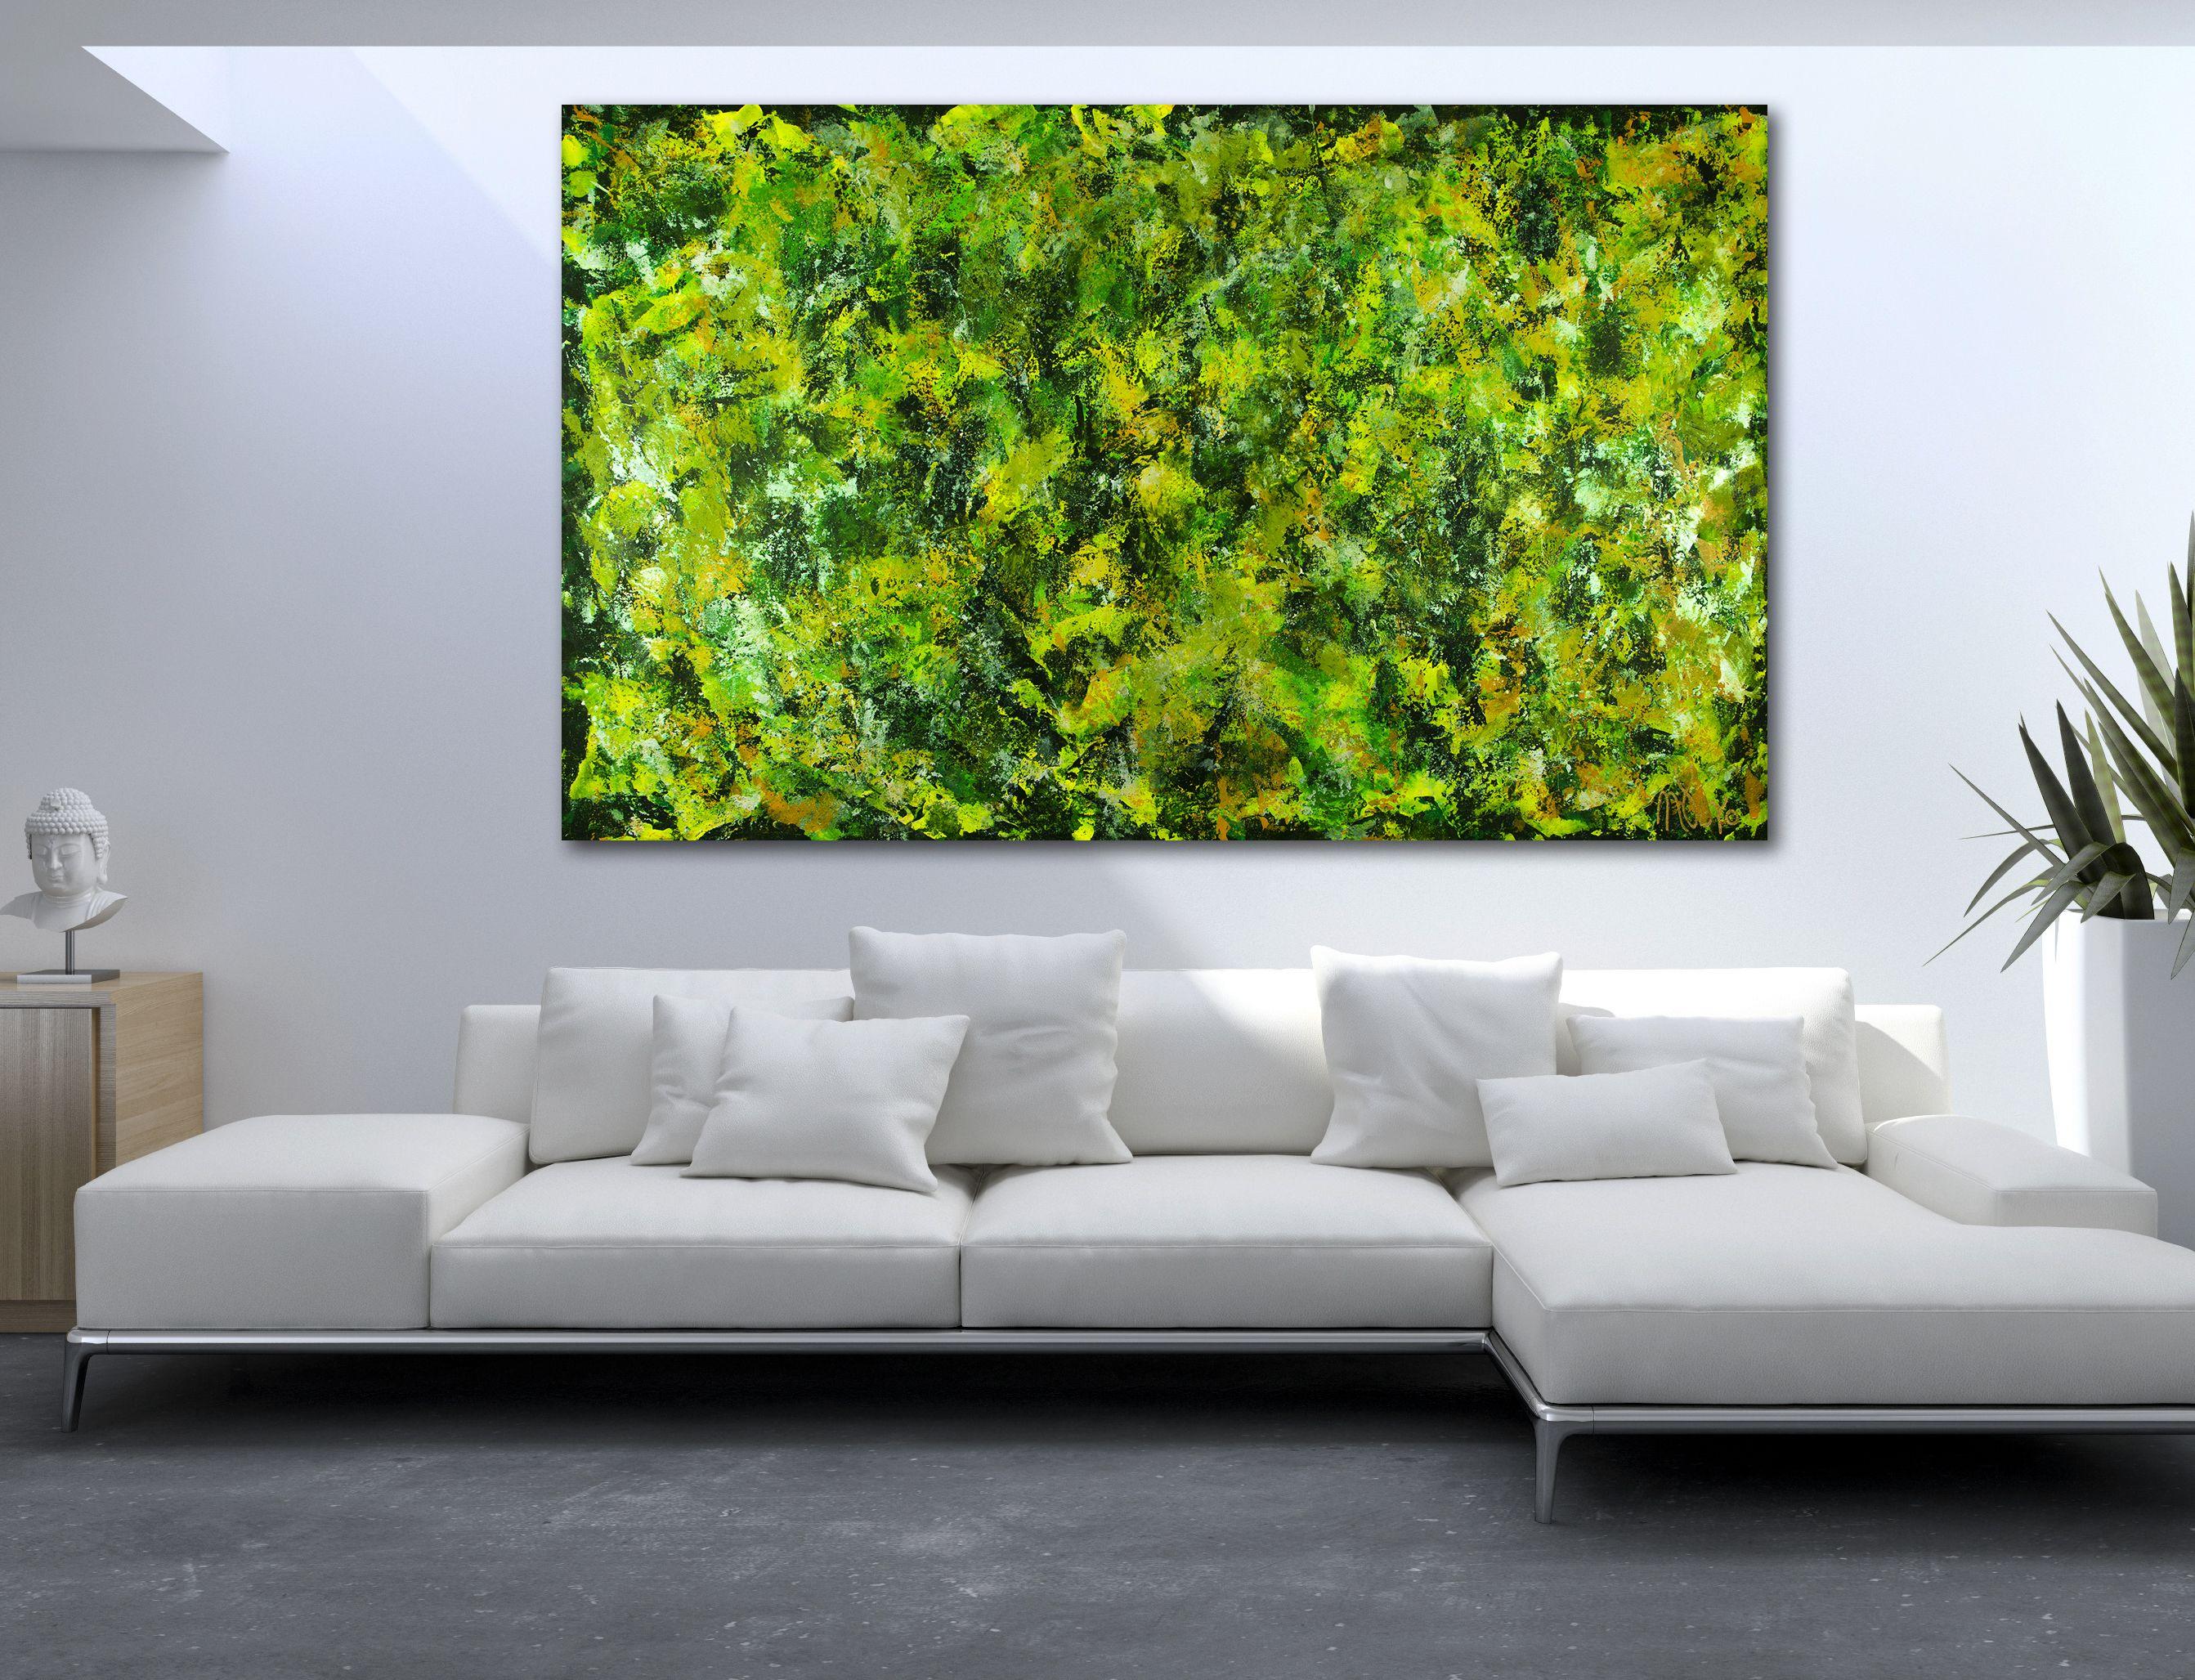 Painting: Acrylic on Canvas.    Large inspired by nature abstract painting  acrylic on canvas    This artwork was created layering and blending thin layers of dark green, olive, bright green, Indian yellow and Iridescent reflective green. Signed in